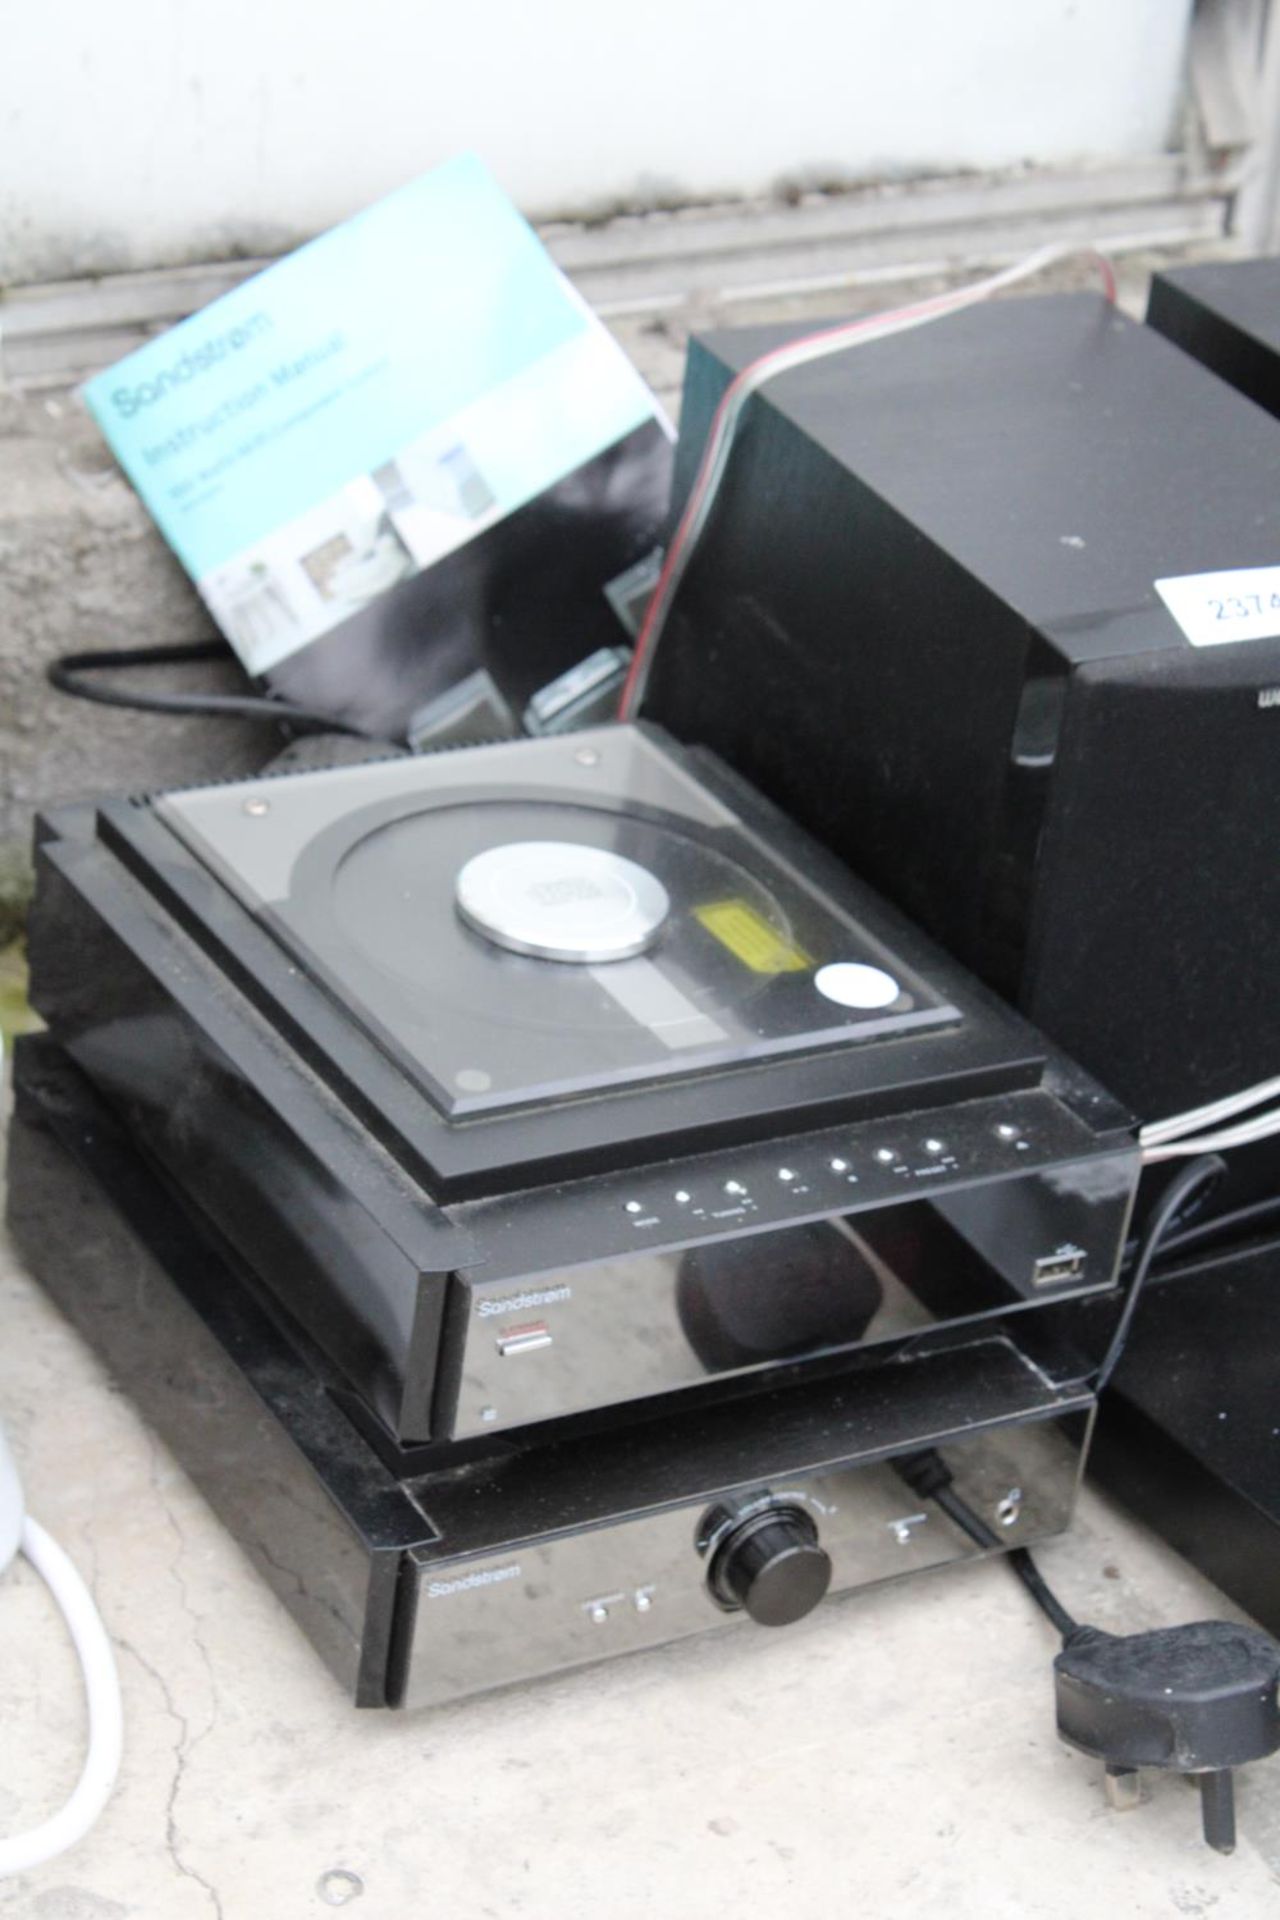 A SONY DVD PLAYER AND A SONDSTROM STEREO WITH TWO SPEAKERS - Bild 2 aus 2